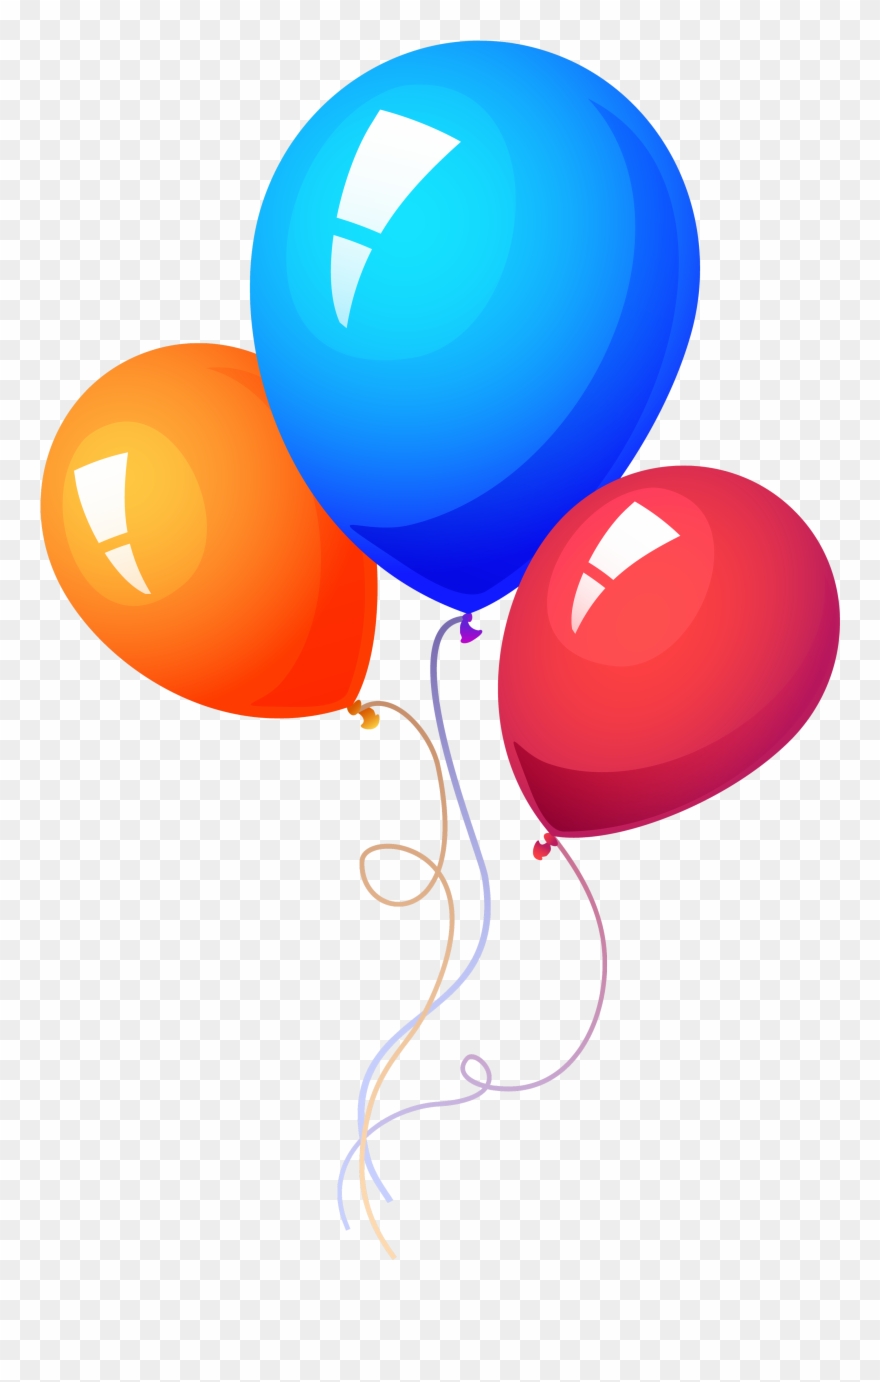 Balloon Image Png Transparent Background Clipart